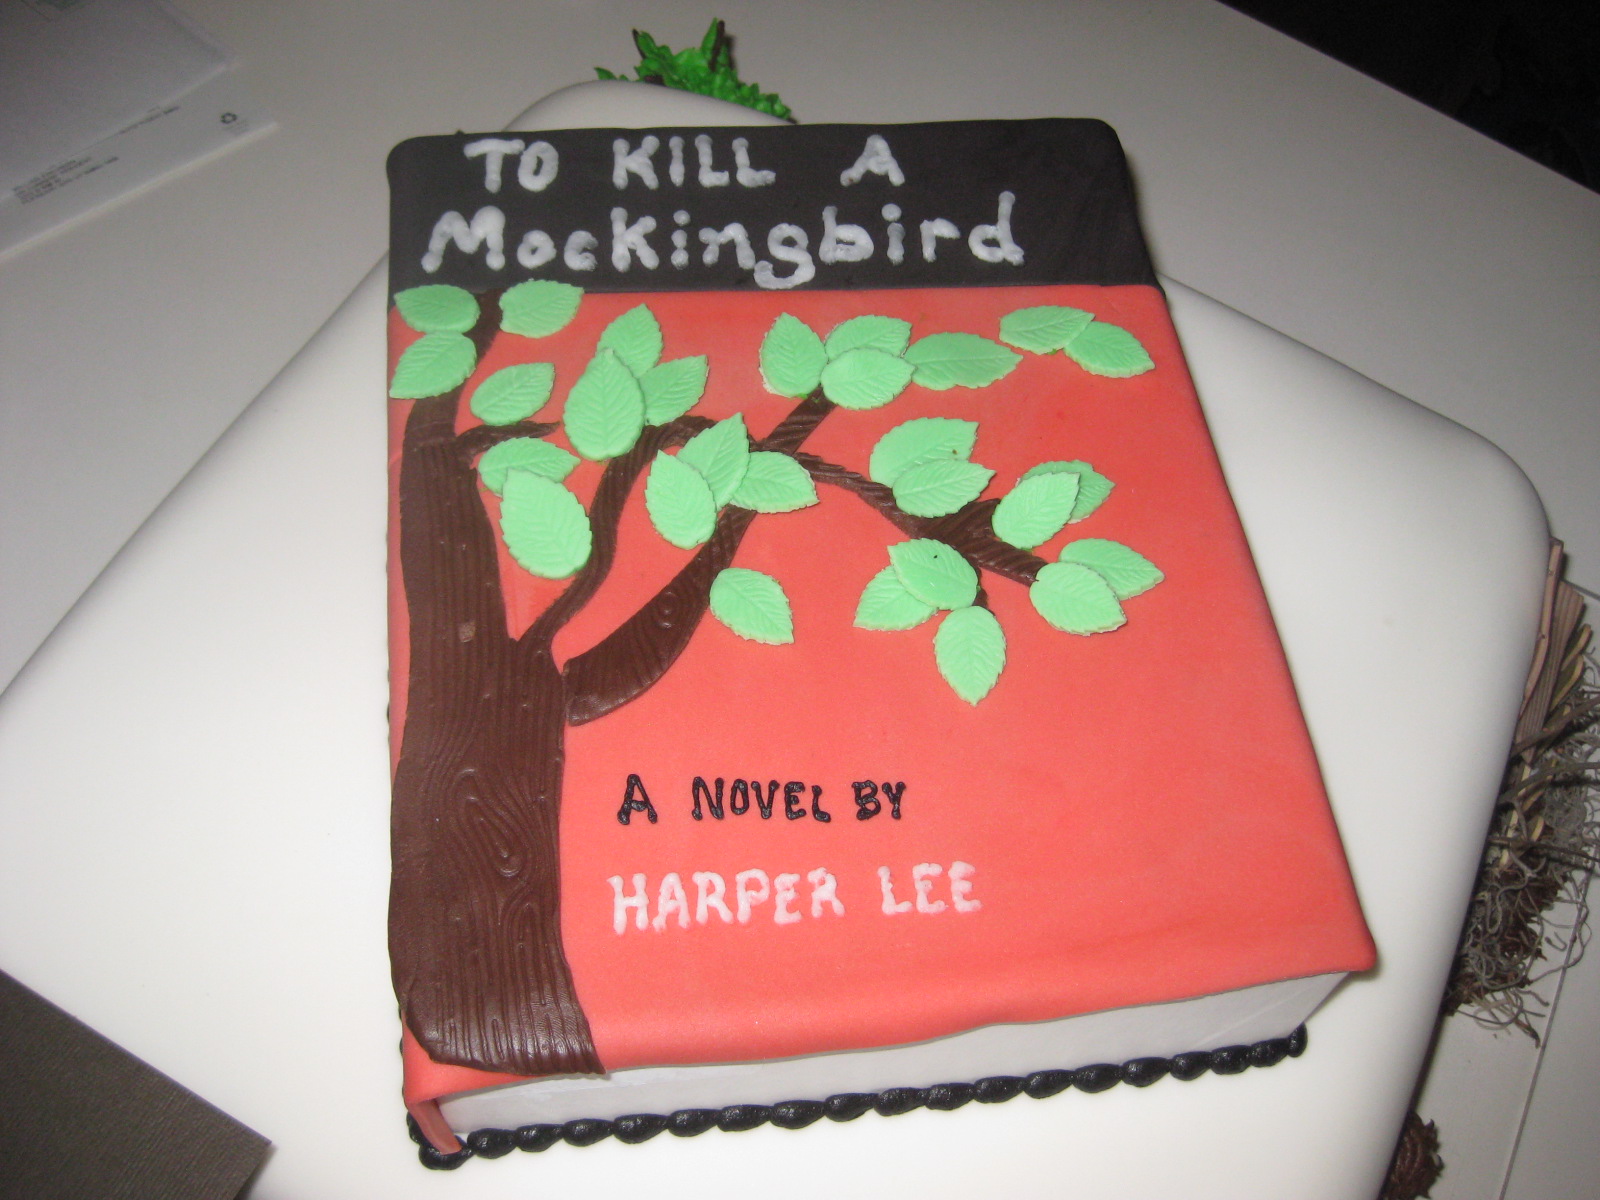 how to make a book report cake